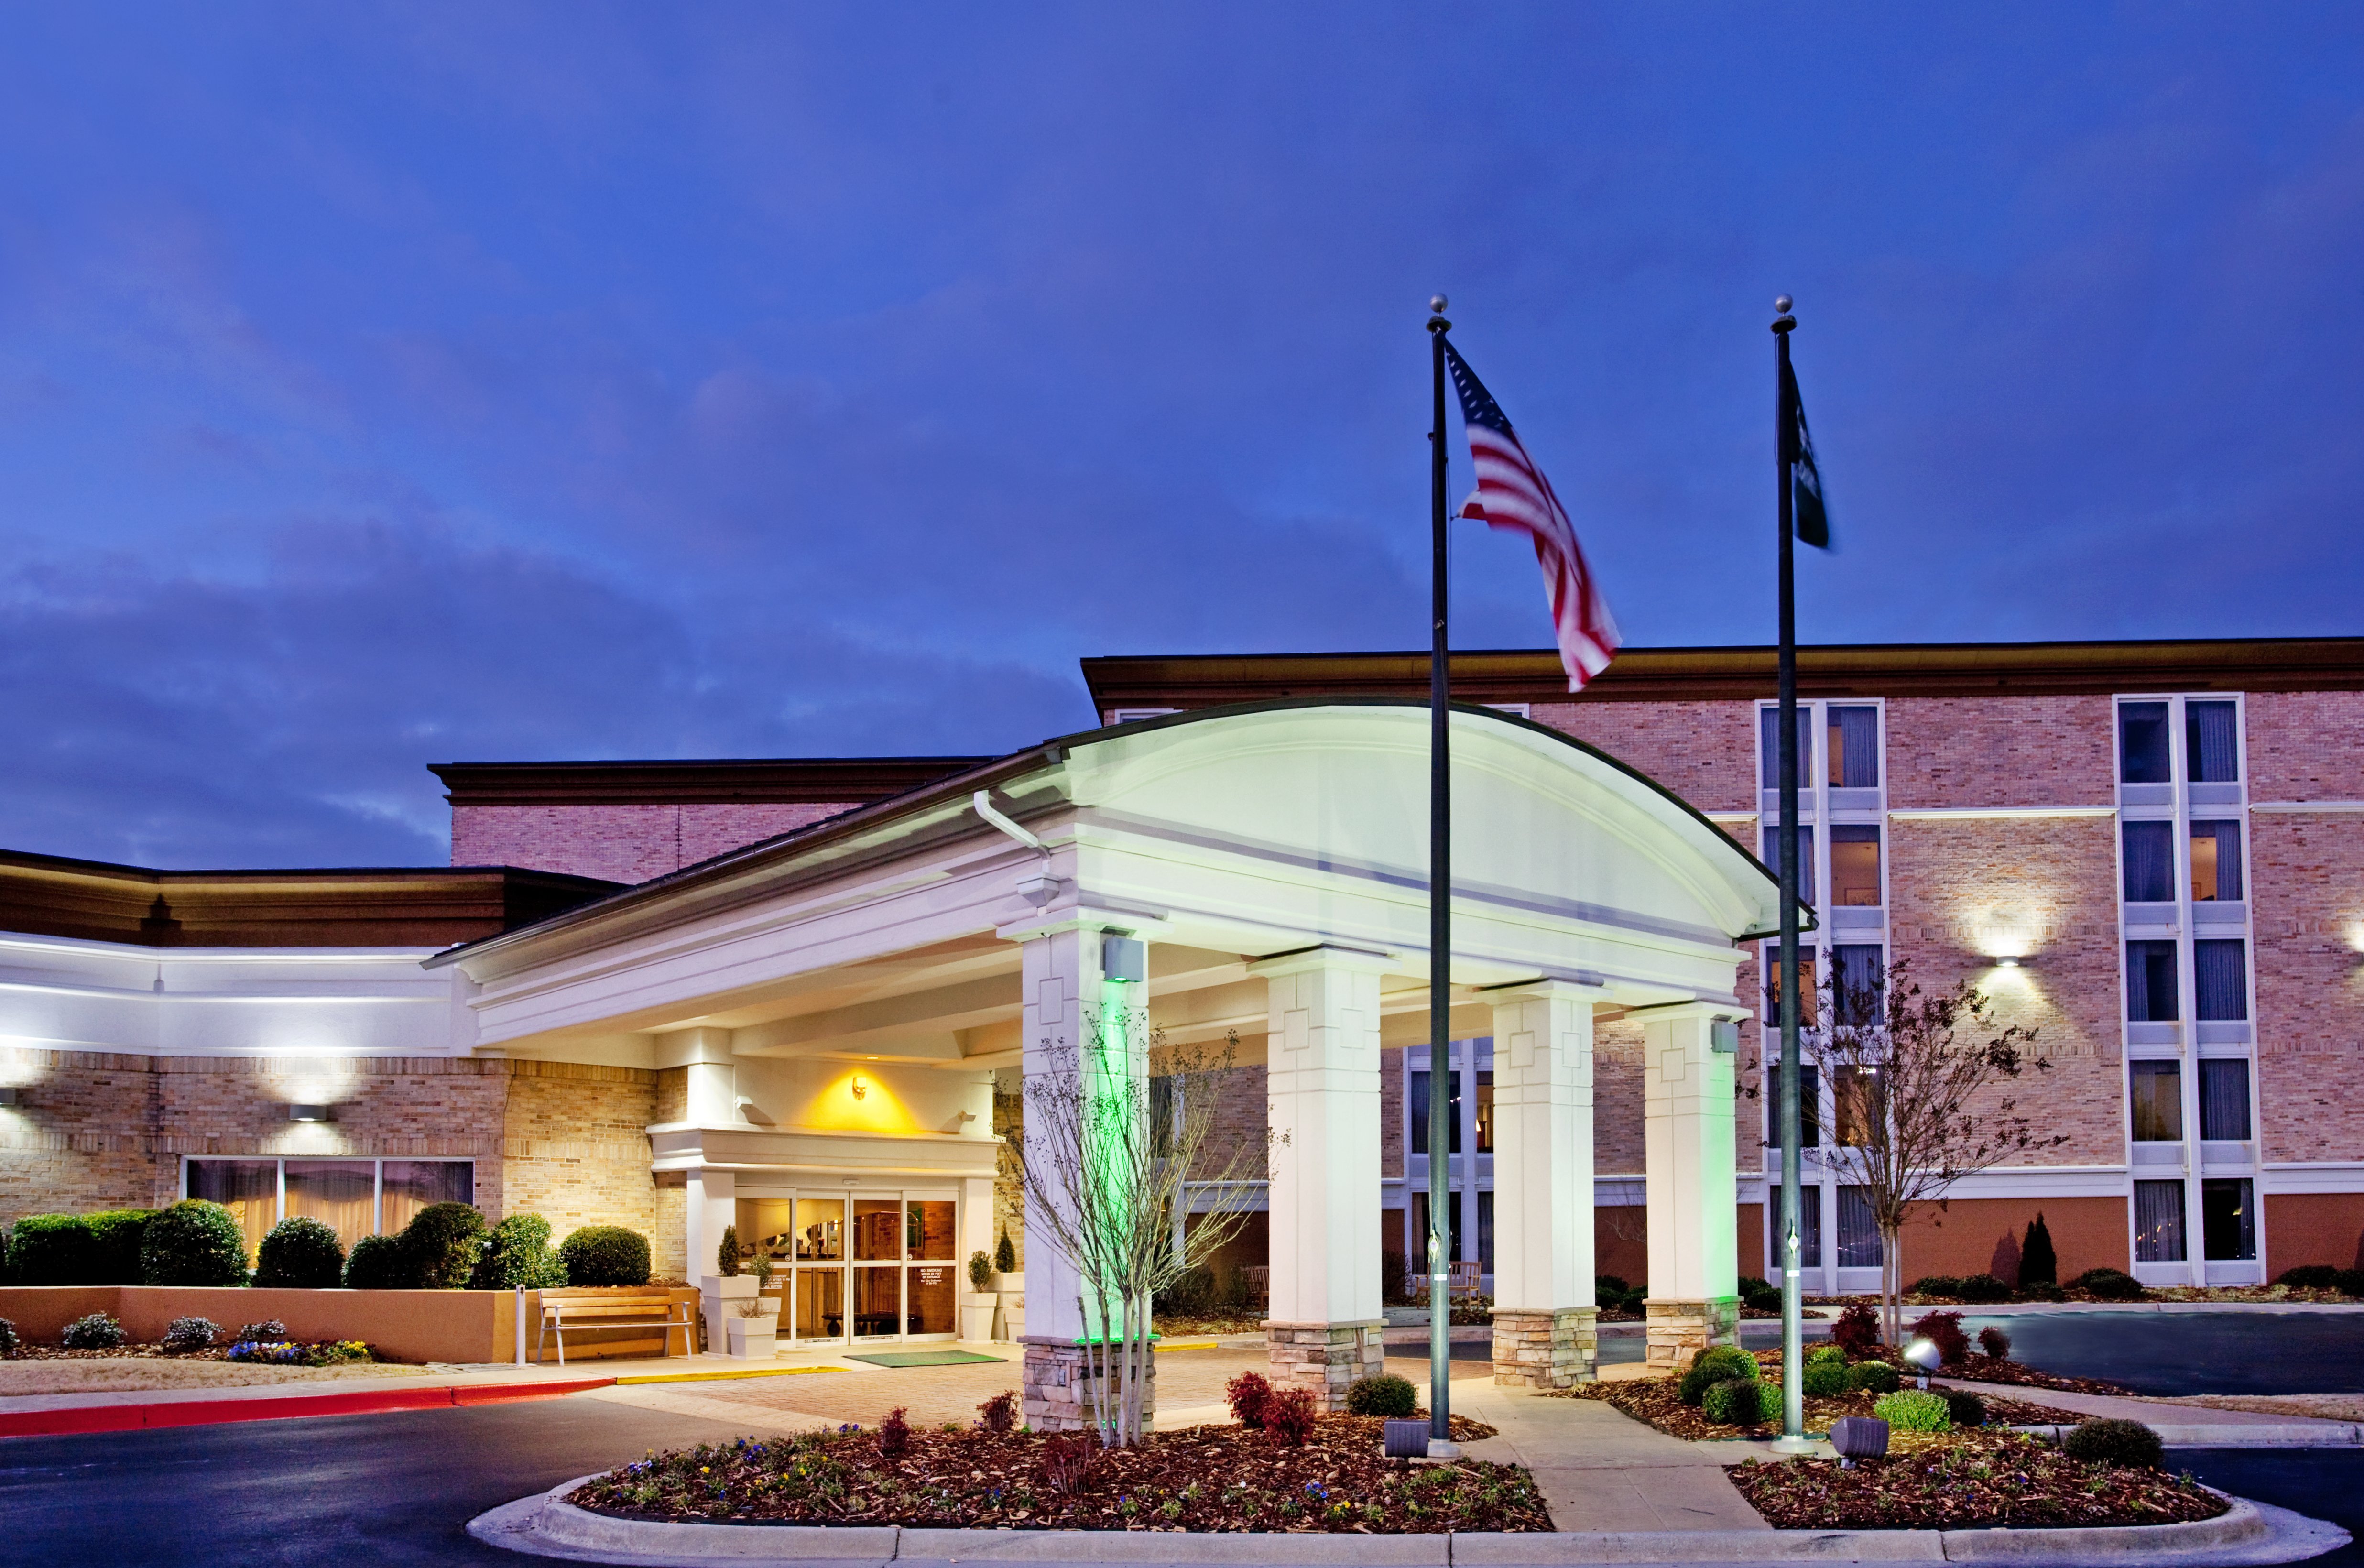 Holiday Inn Research Park located close to the Redstone Arsenal